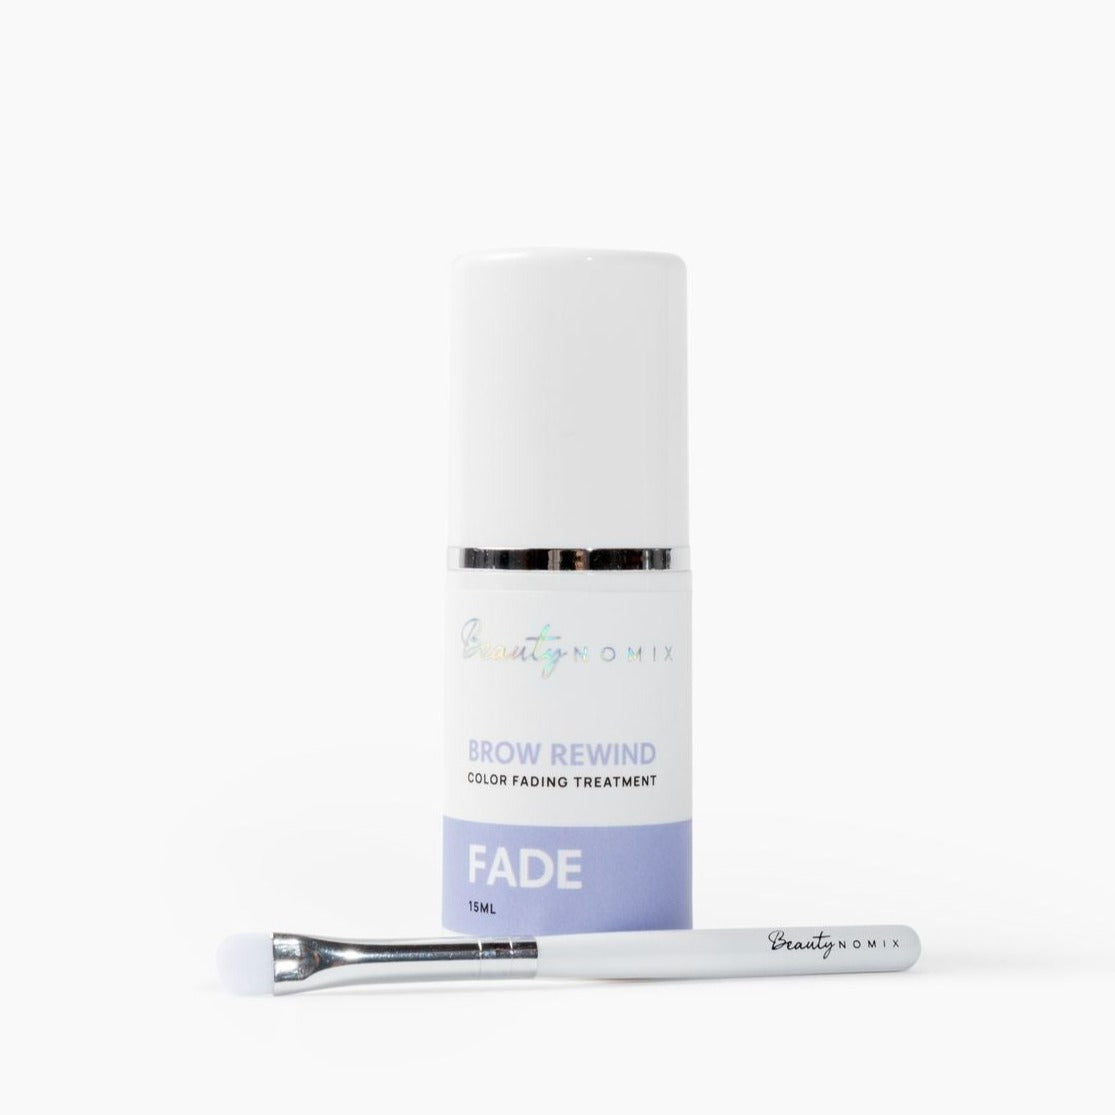 FADE - Eyebrow Tattoo Color Fading Treatment by BROW REWIND